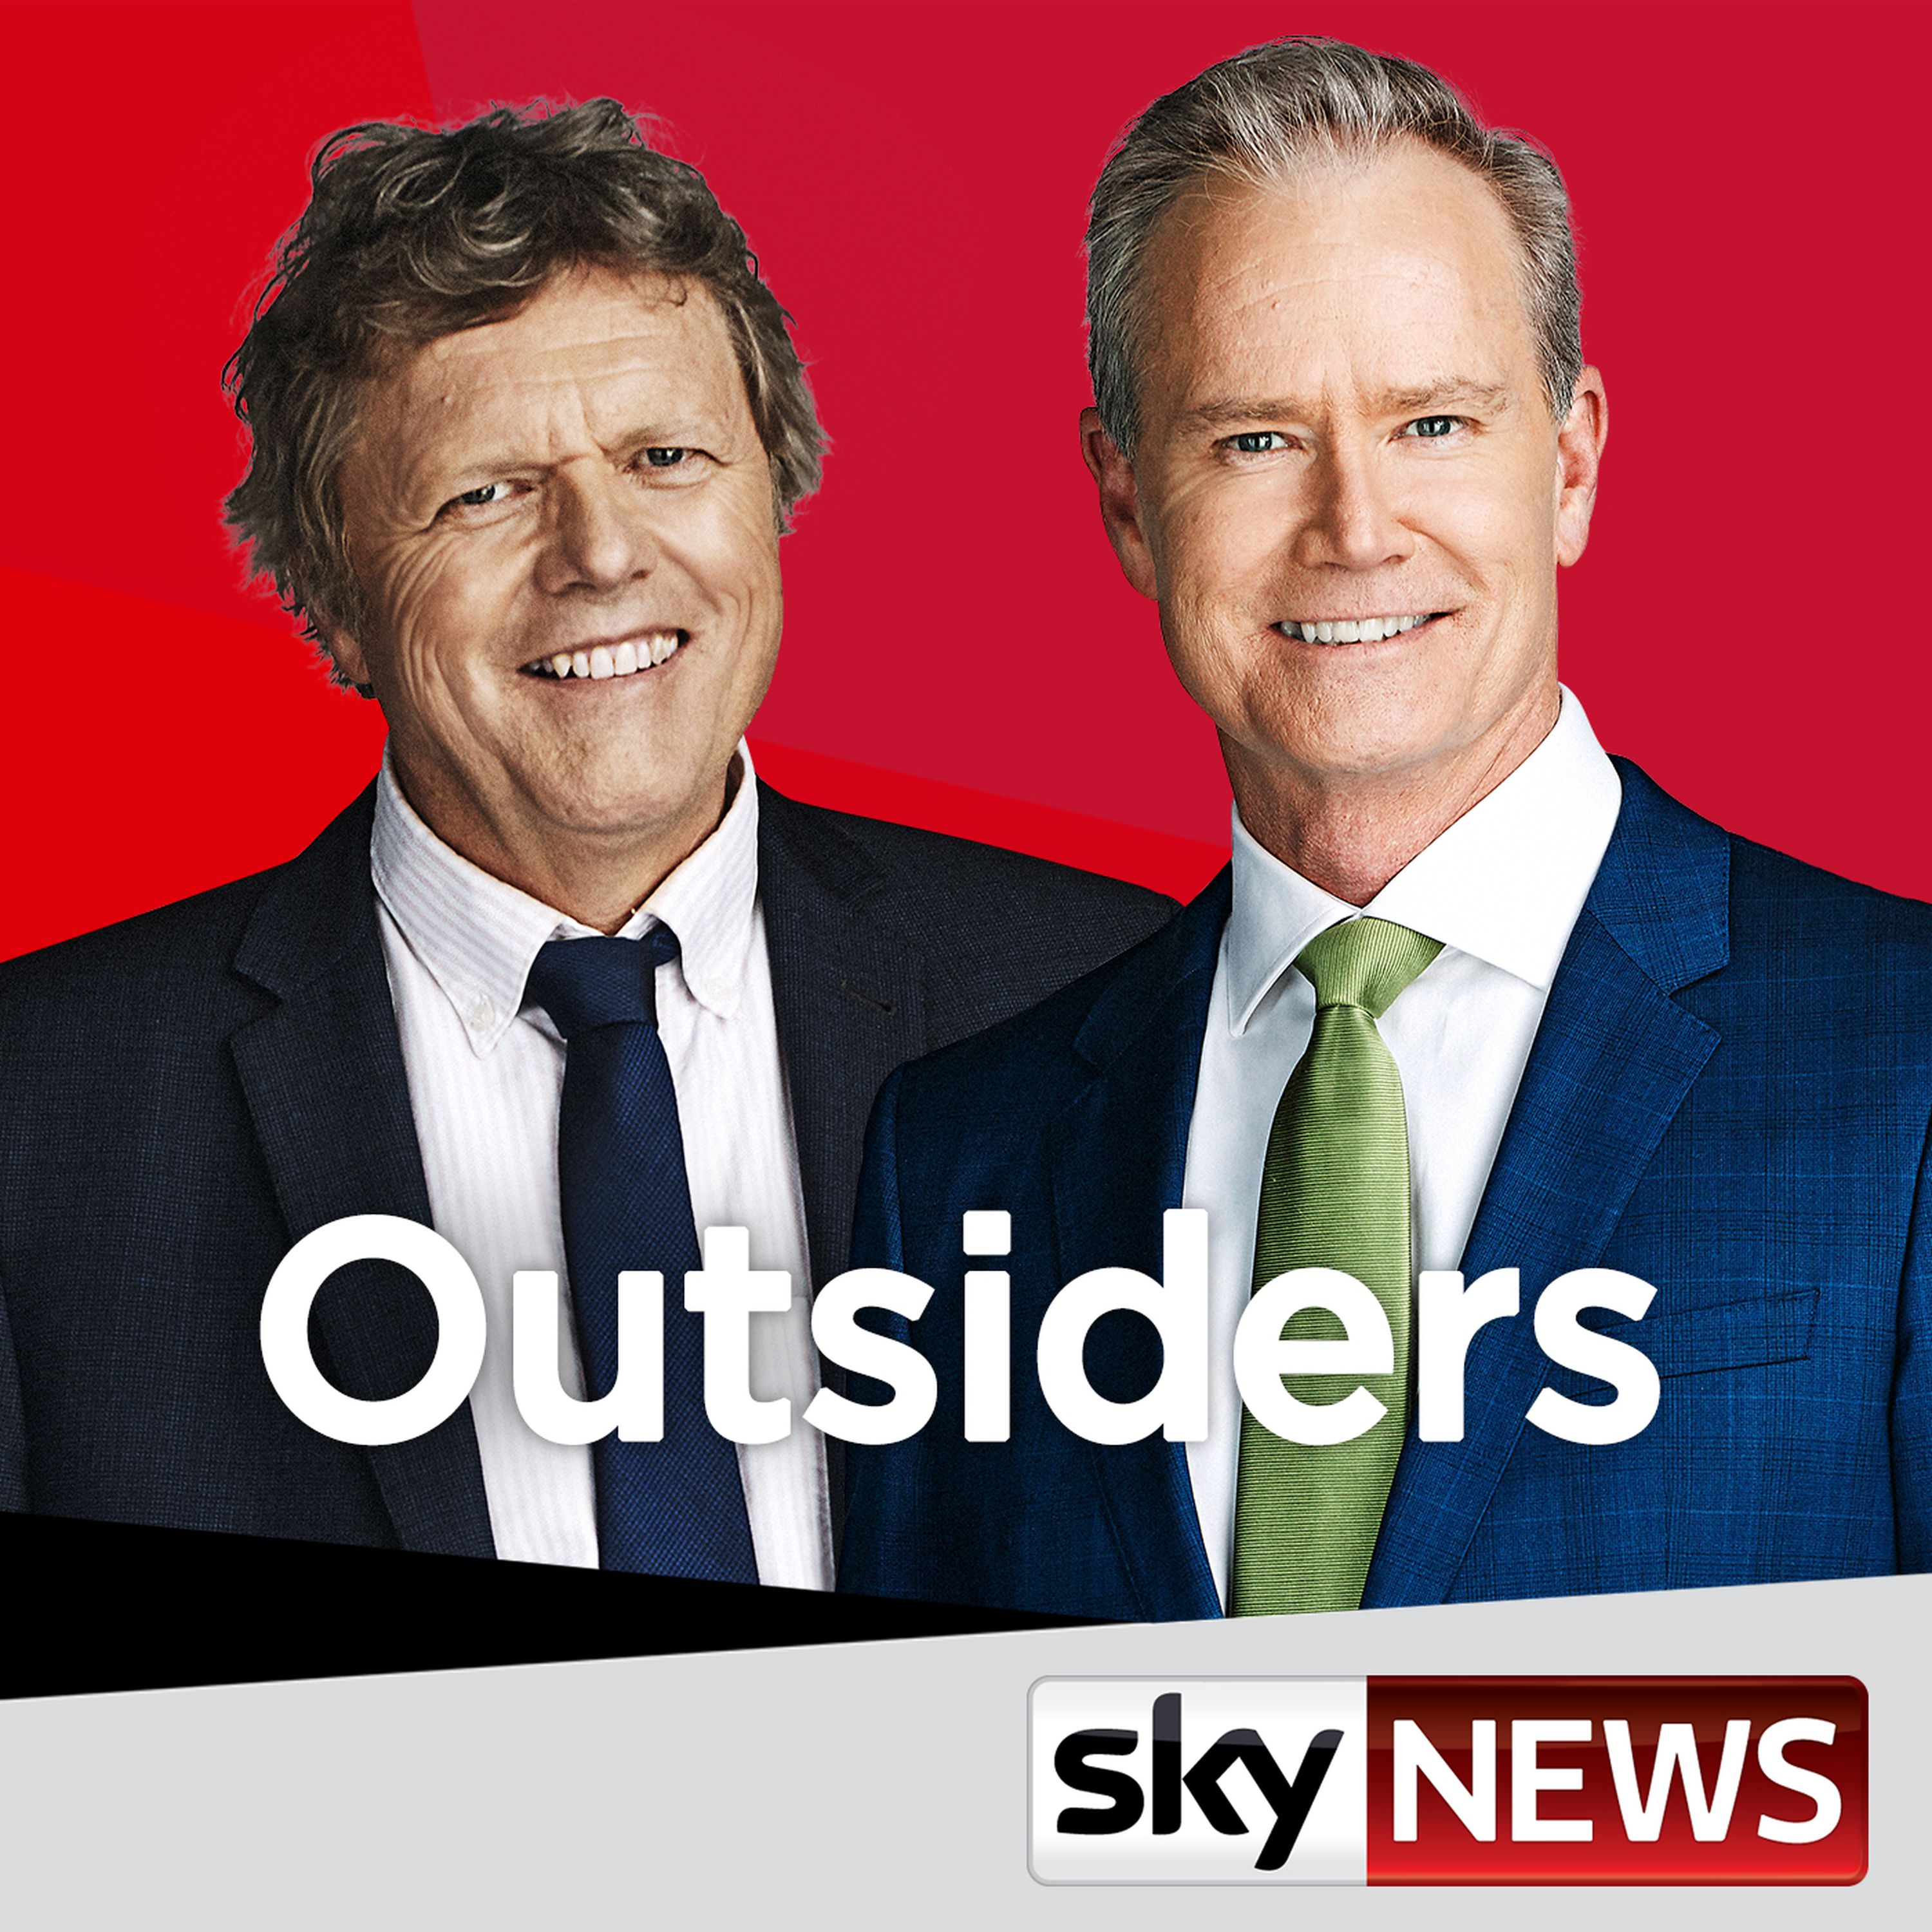 Outsiders, Sunday 7th October